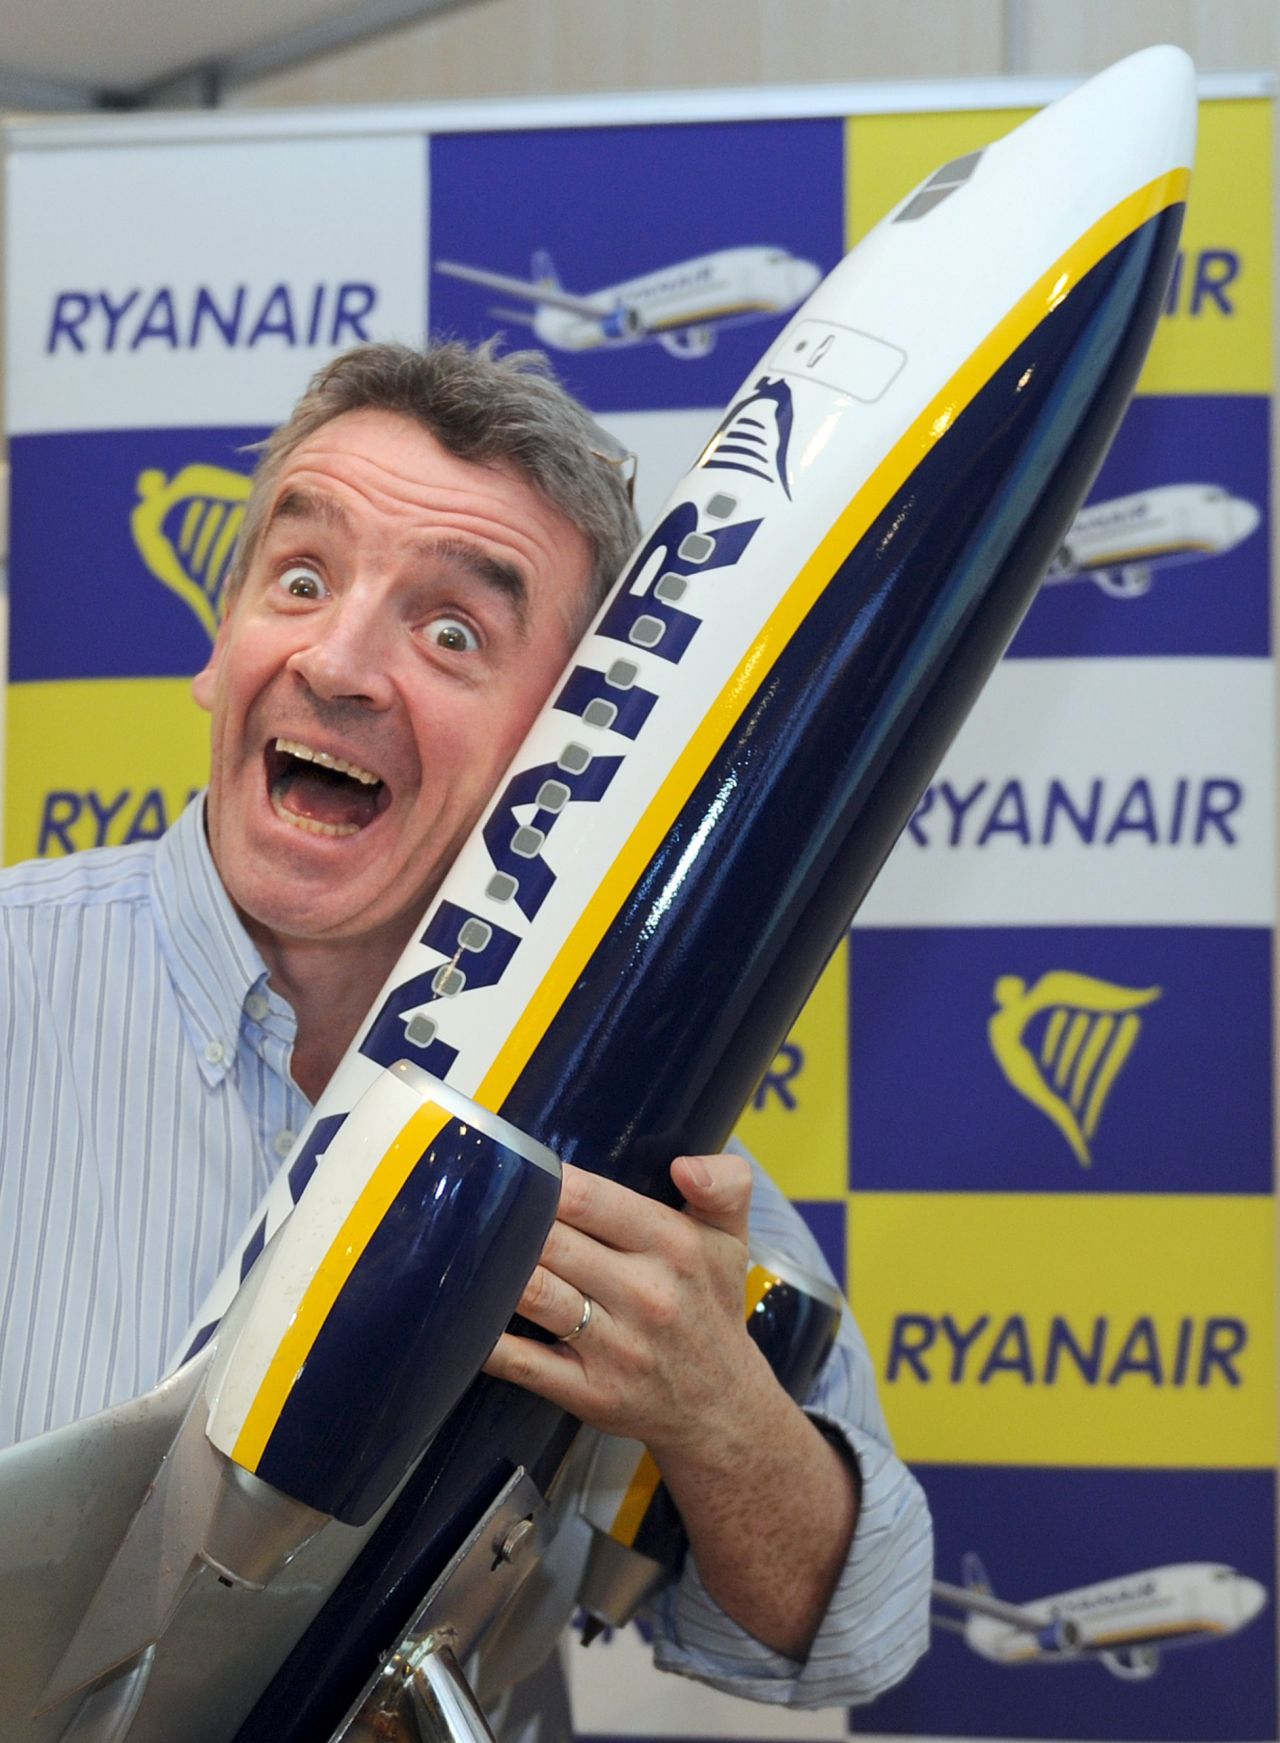 According to a Ryanair spokesperson, Michael O'Leary, the CEO of the budget airline is considering a new system that would allow passengers to gamble during flights. 